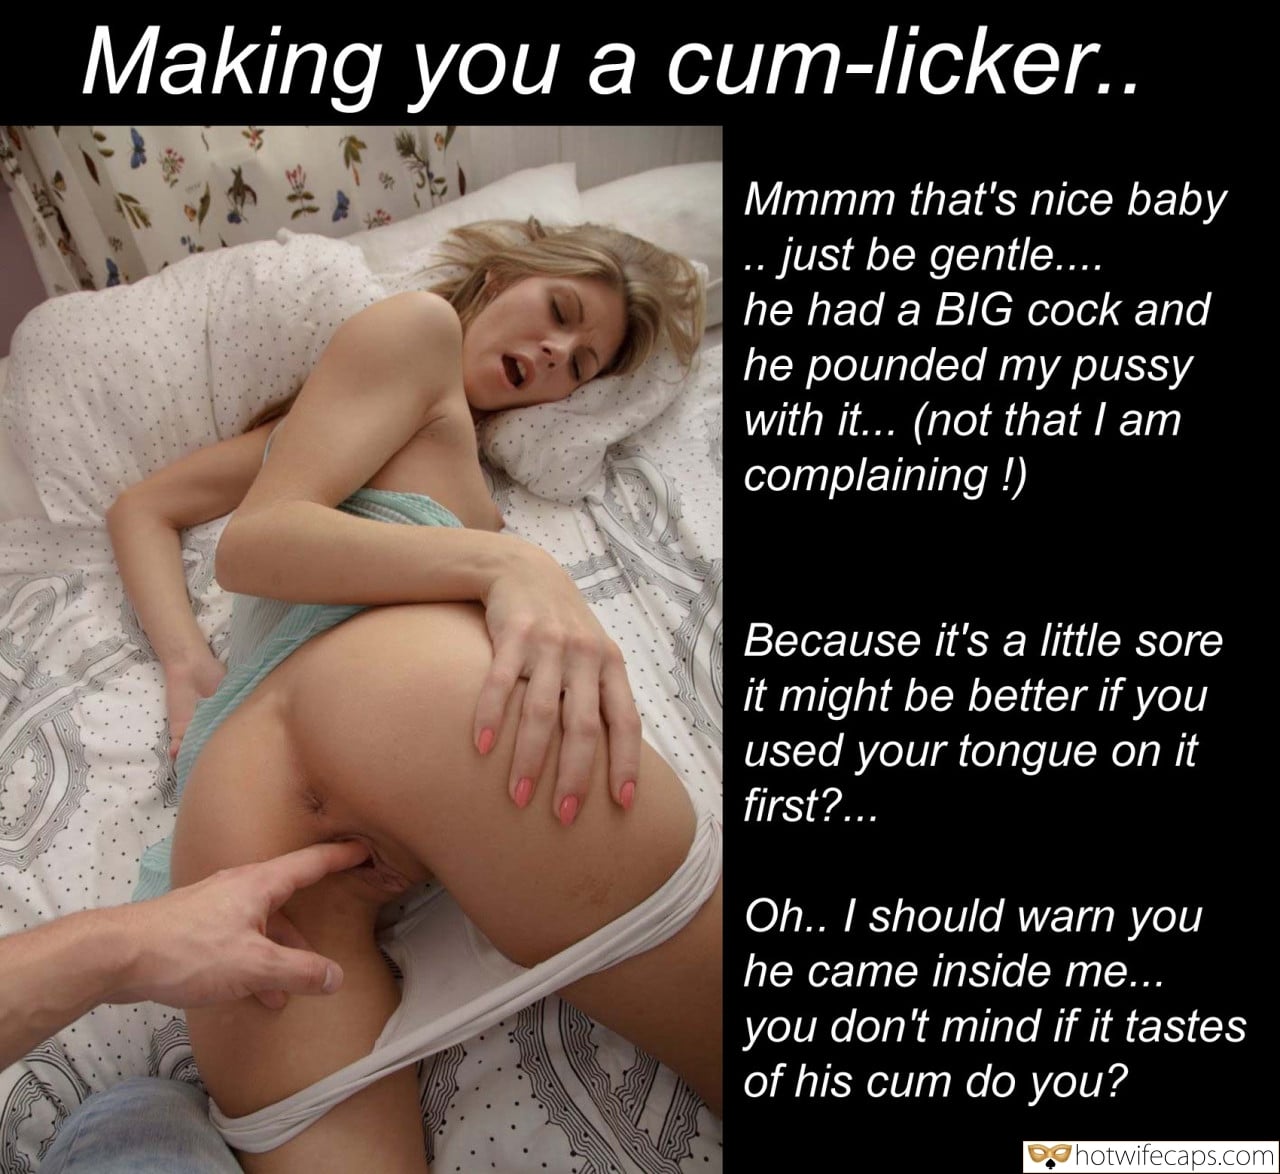 It's too big Cum Slut Cuckold Cleanup Creampie Bigger Cock  hotwife caption: Making you a cum-licker.. Mmmm that’s nice baby – just be gentle.. he had a BIG cock and he pounded my pussy with it… (not that I am complaining !) Because it’s a little sore it might be better if...